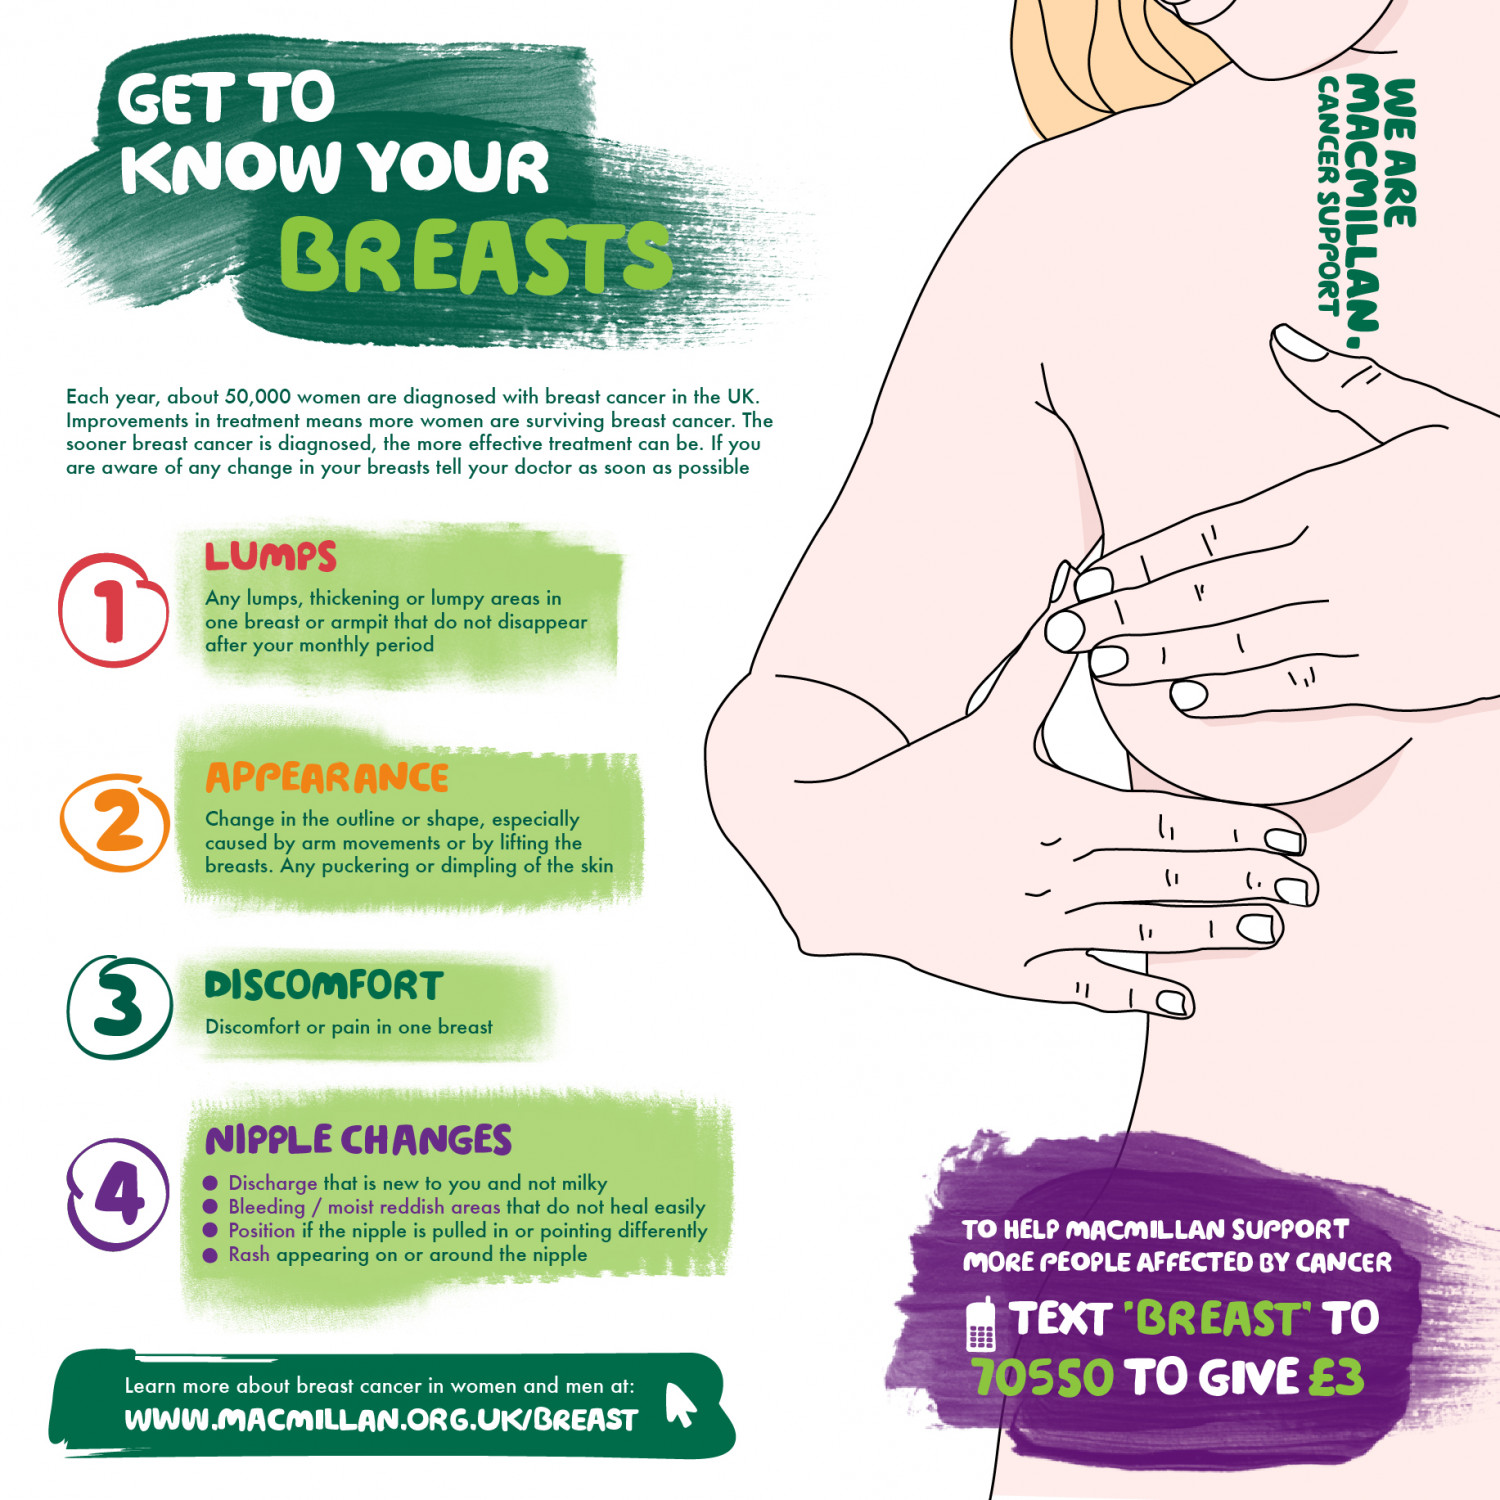 Get To Know Your Breasts